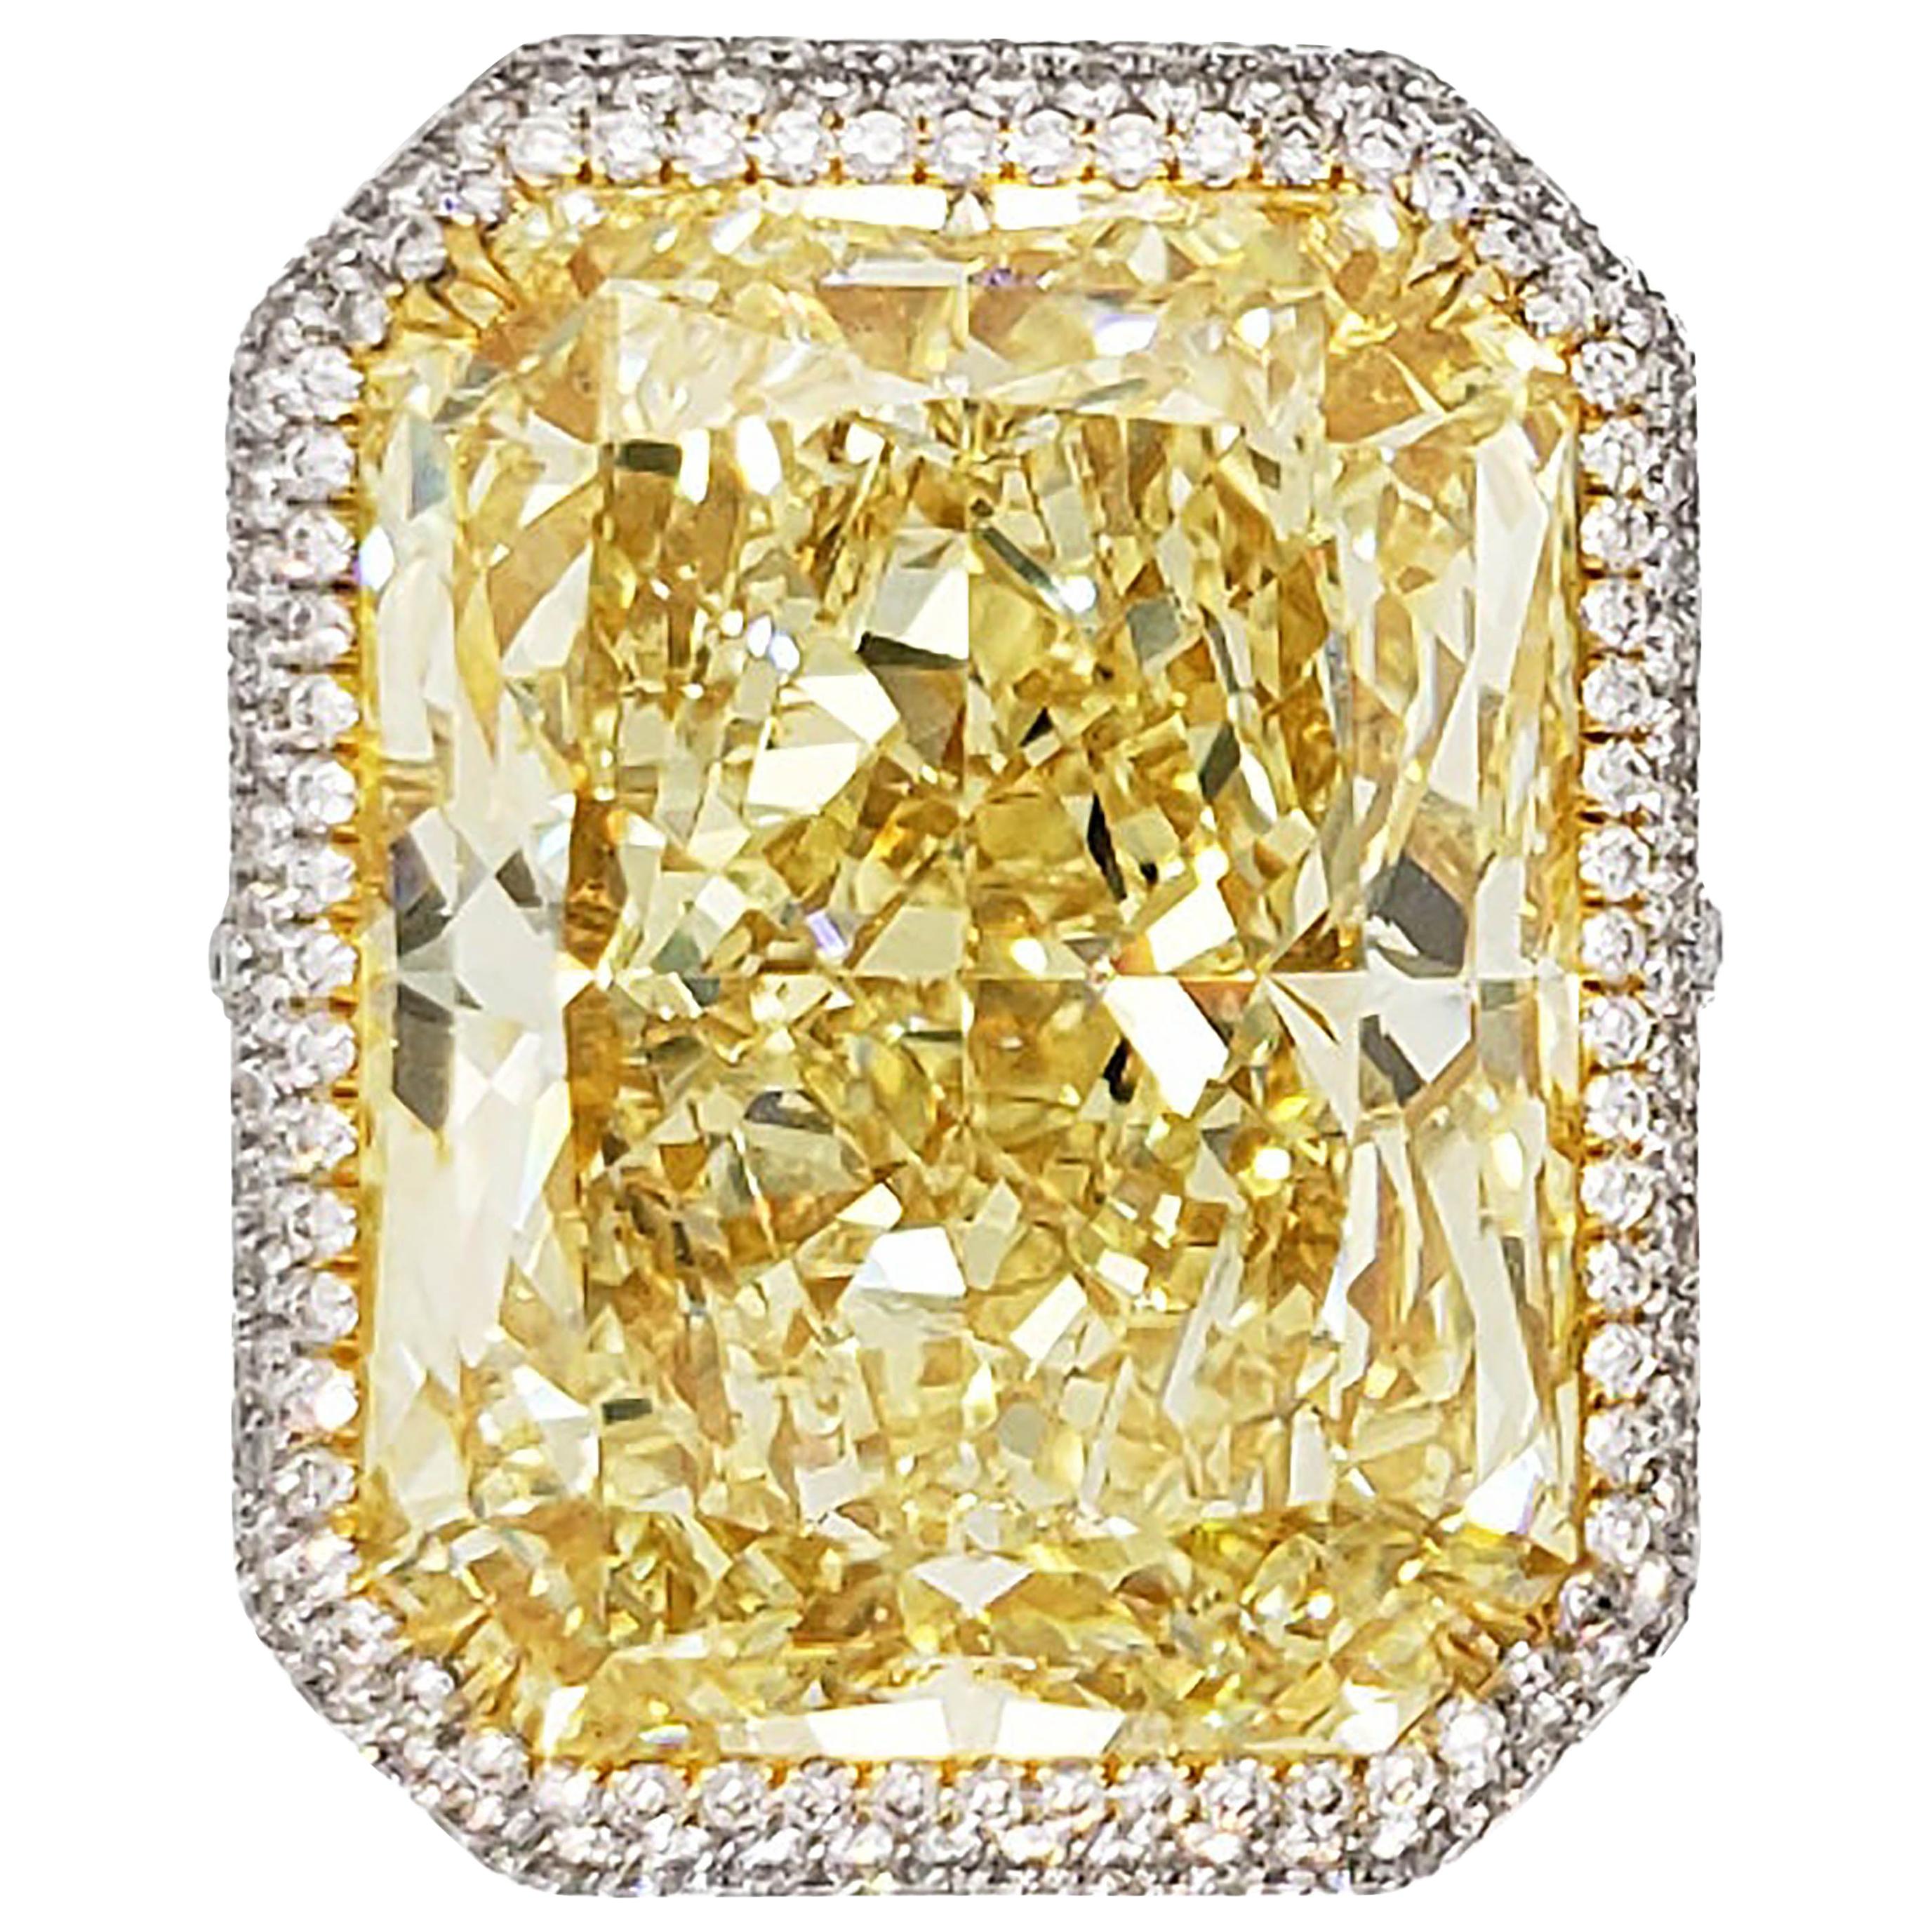 Scarselli 31 Carat Natural Fancy Yellow Diamond Ring VS1 Clarity in Platinum GIA For Sale